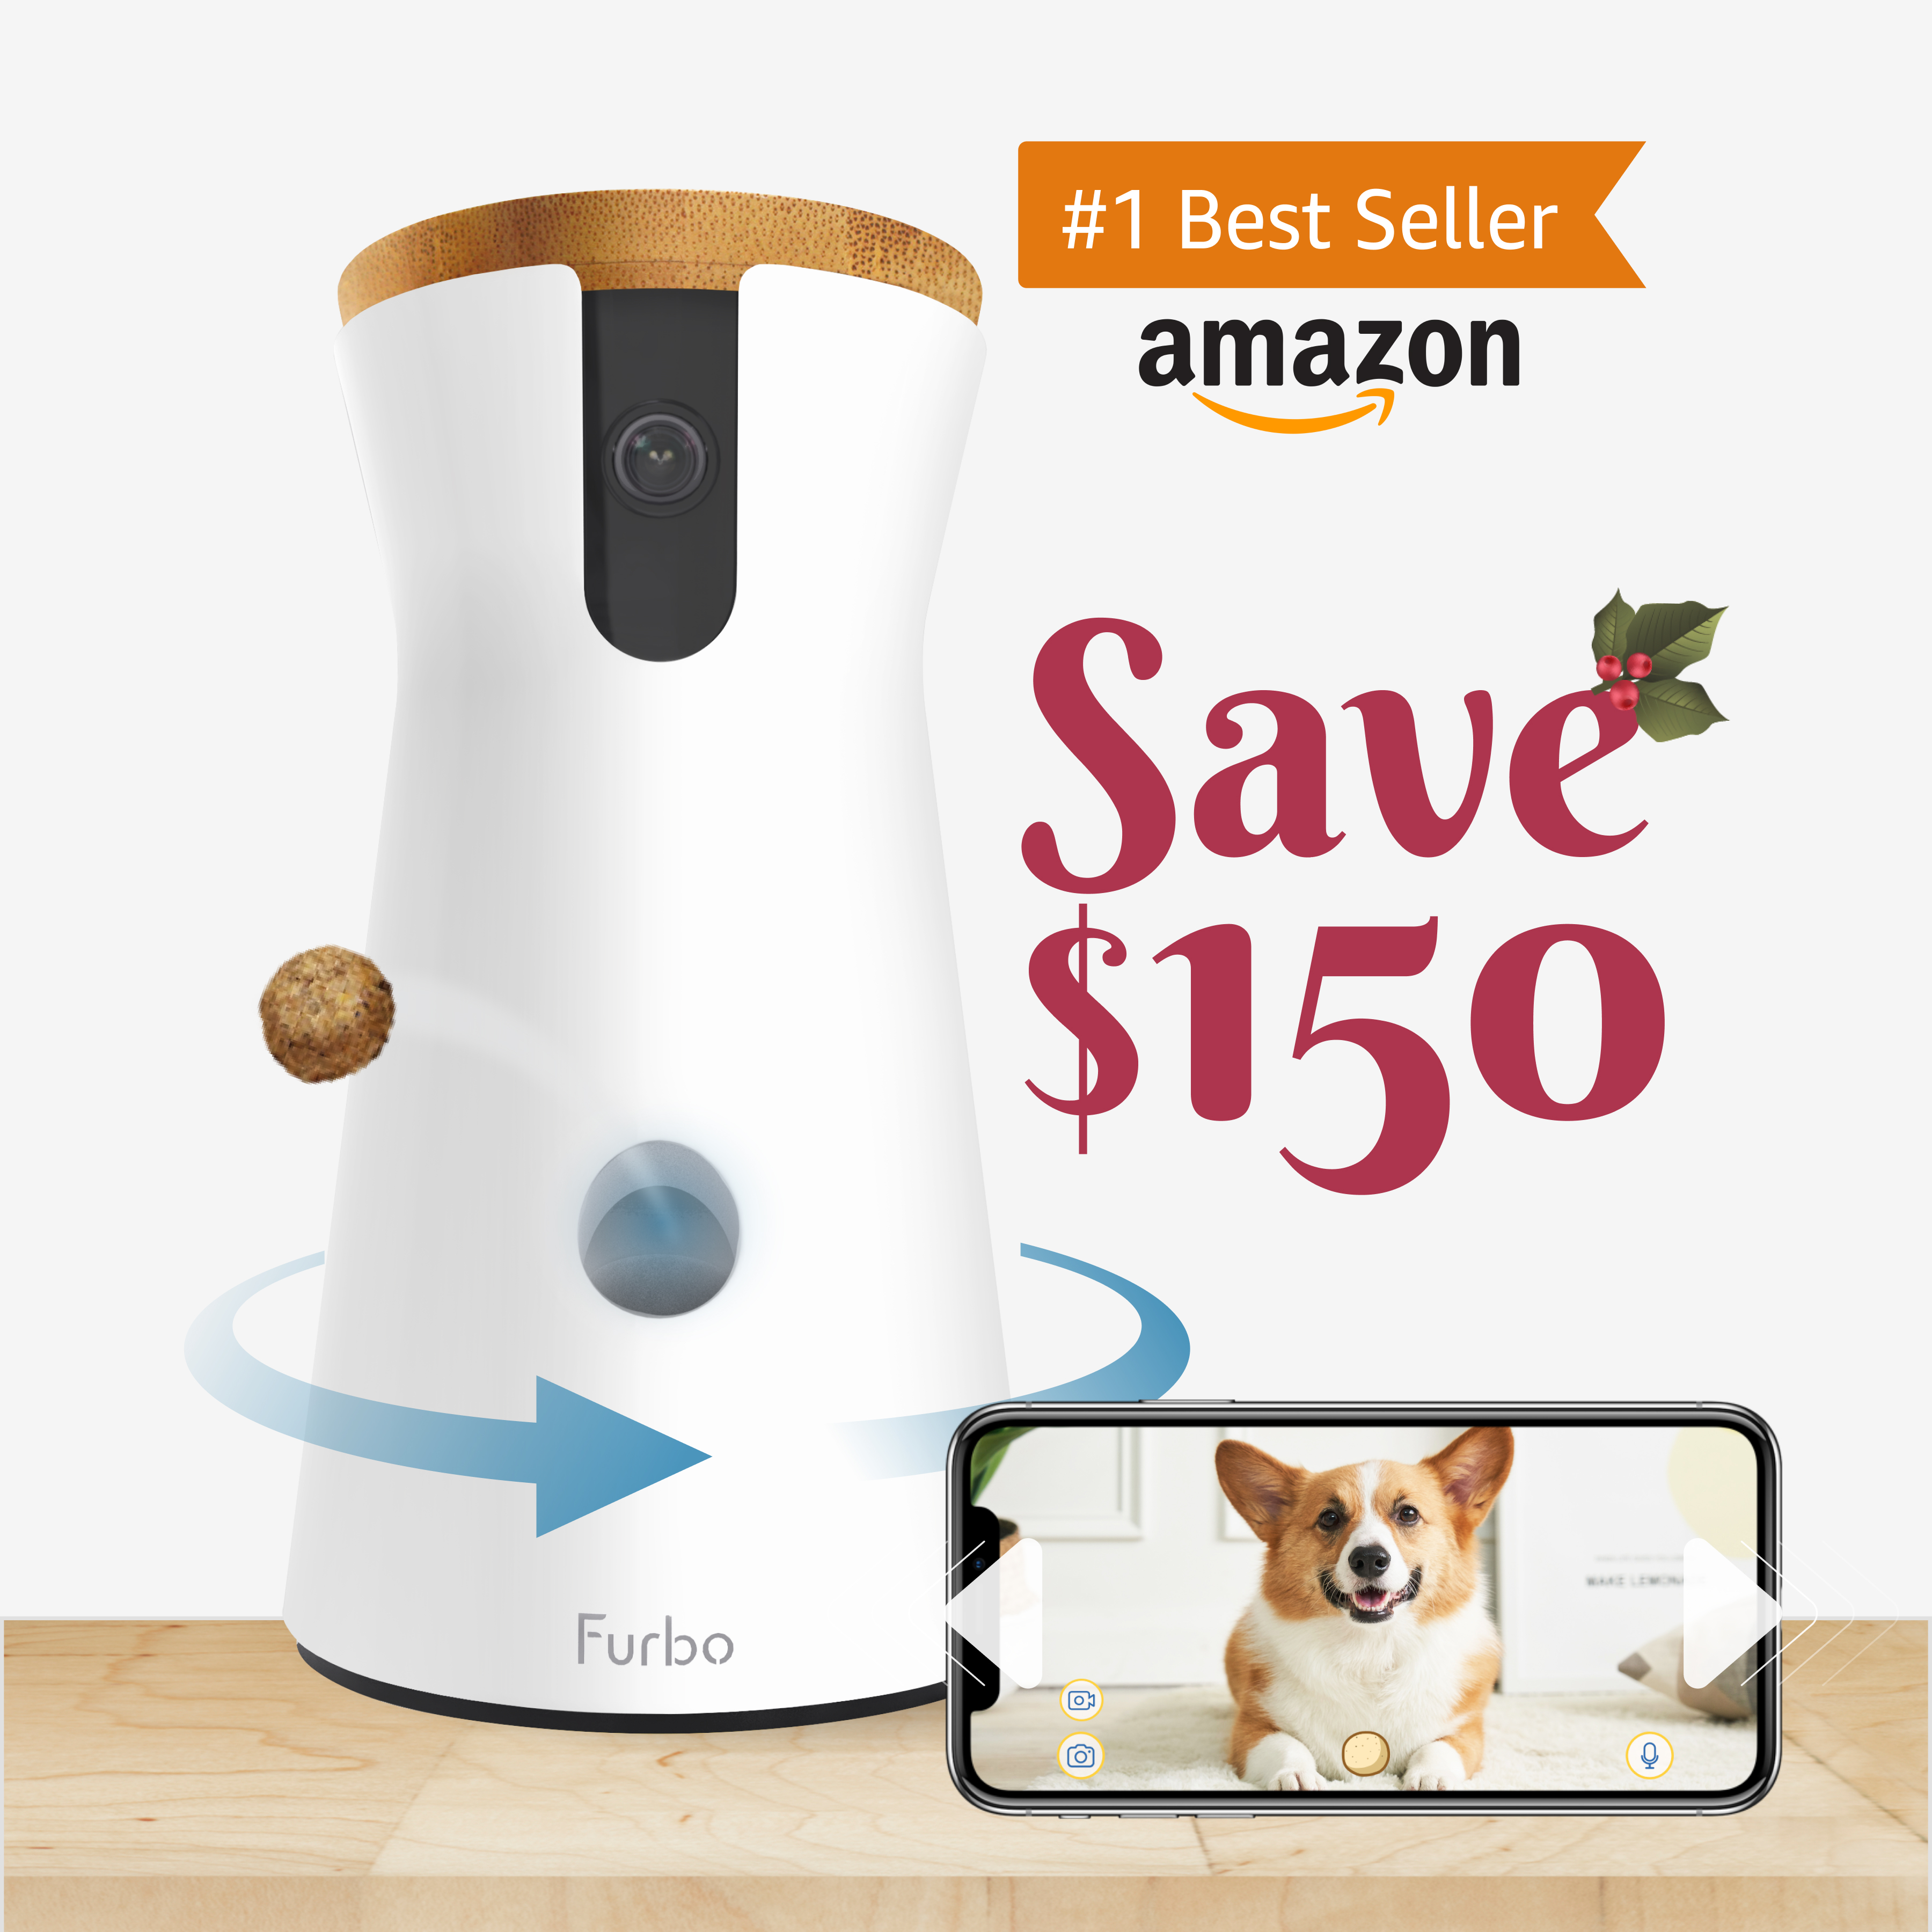 Furbo 360° Dog Camera | Treat-tossing Pet Camera with 360° view.